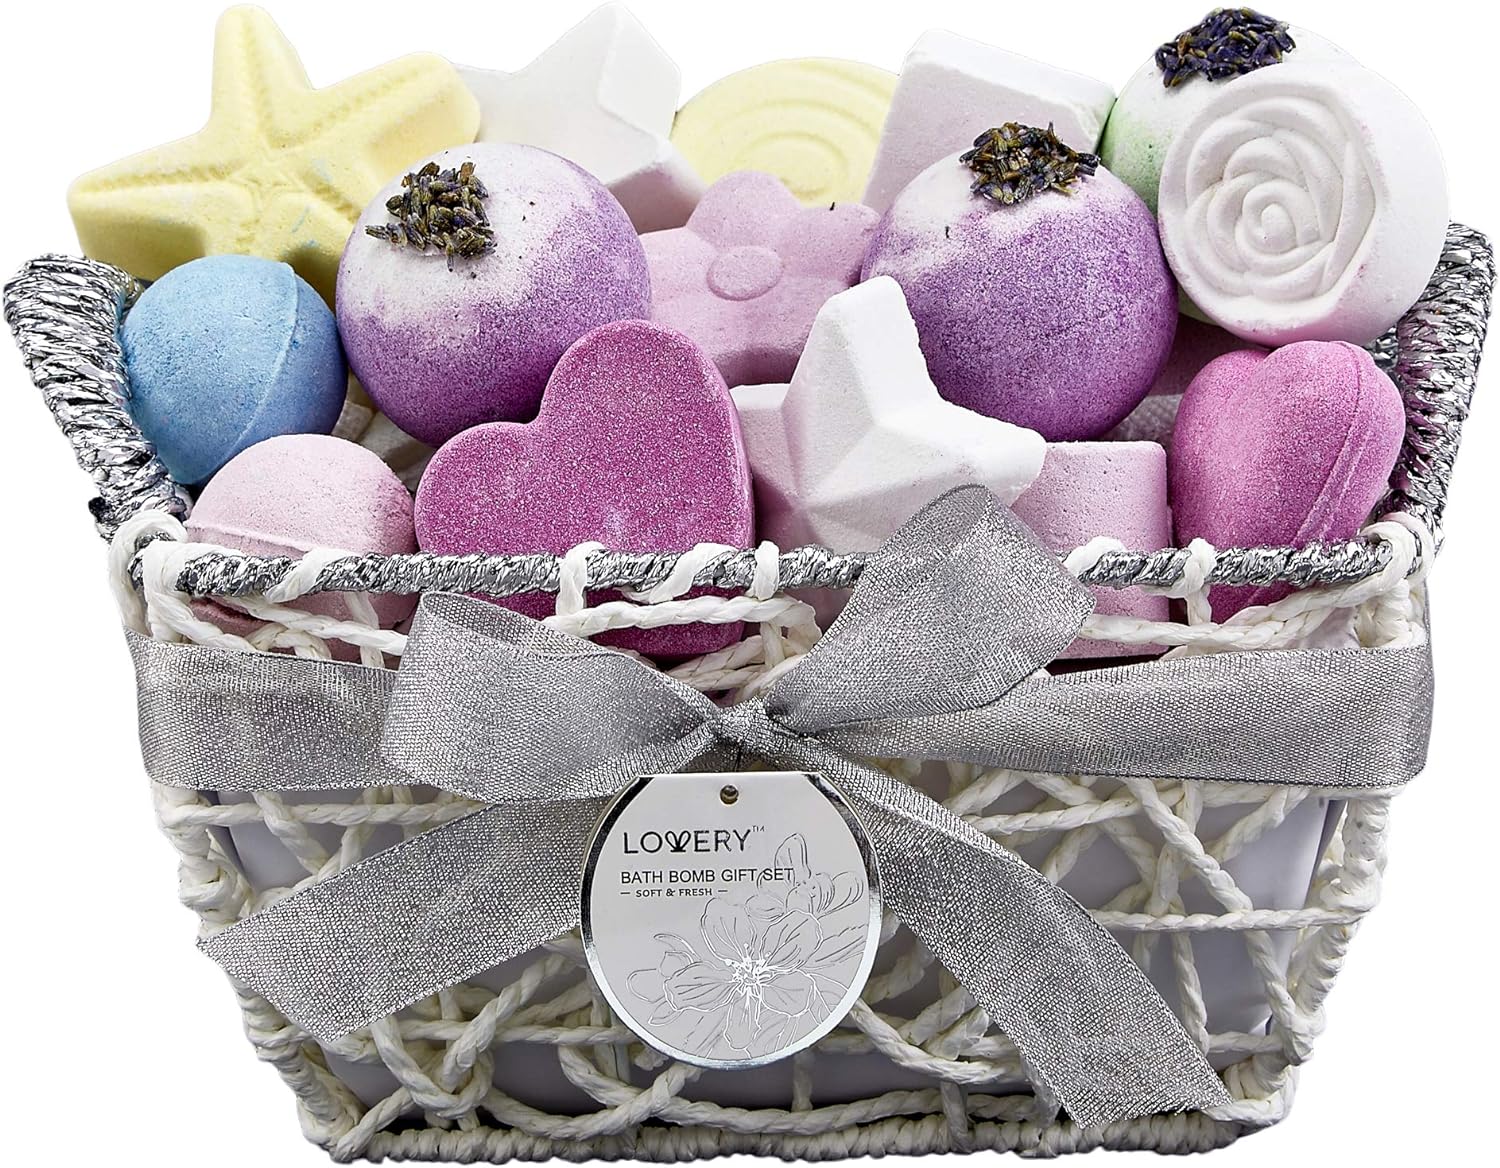 Christmas Gifts, Bath Bombs Gift Set for Women, 17 Large Bath Fizzies in Assorted Colors, Shapes & Scents, Bath and Body Spa Set with Shea & Coco Butter Ultra Rich Spa Set in Handmade Weaved Basket - image 1 of 9